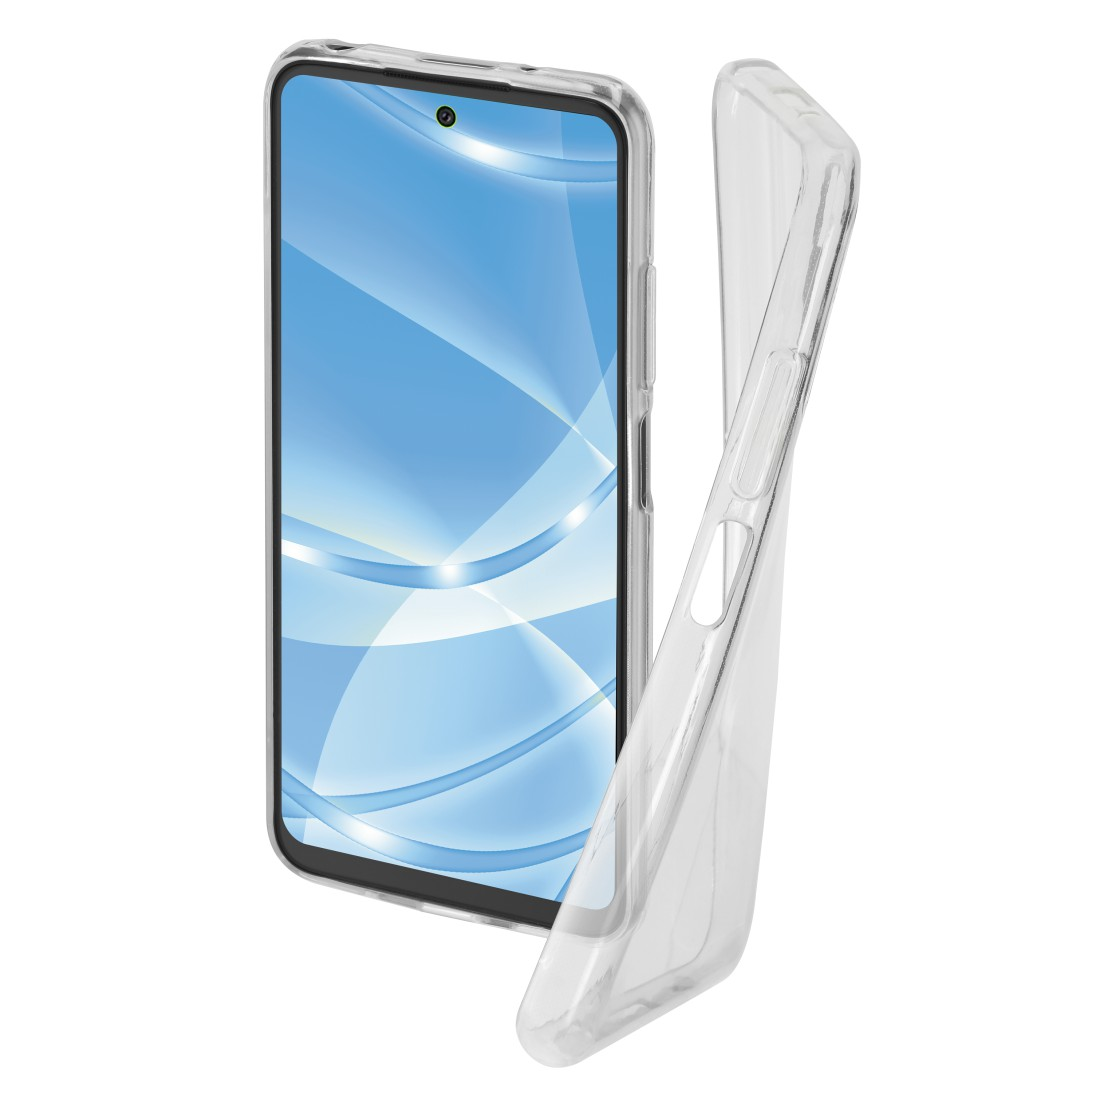 HAMA Crystal 12 Backcover, Note Transparent Xiaomi, Redmi Clear, 5G